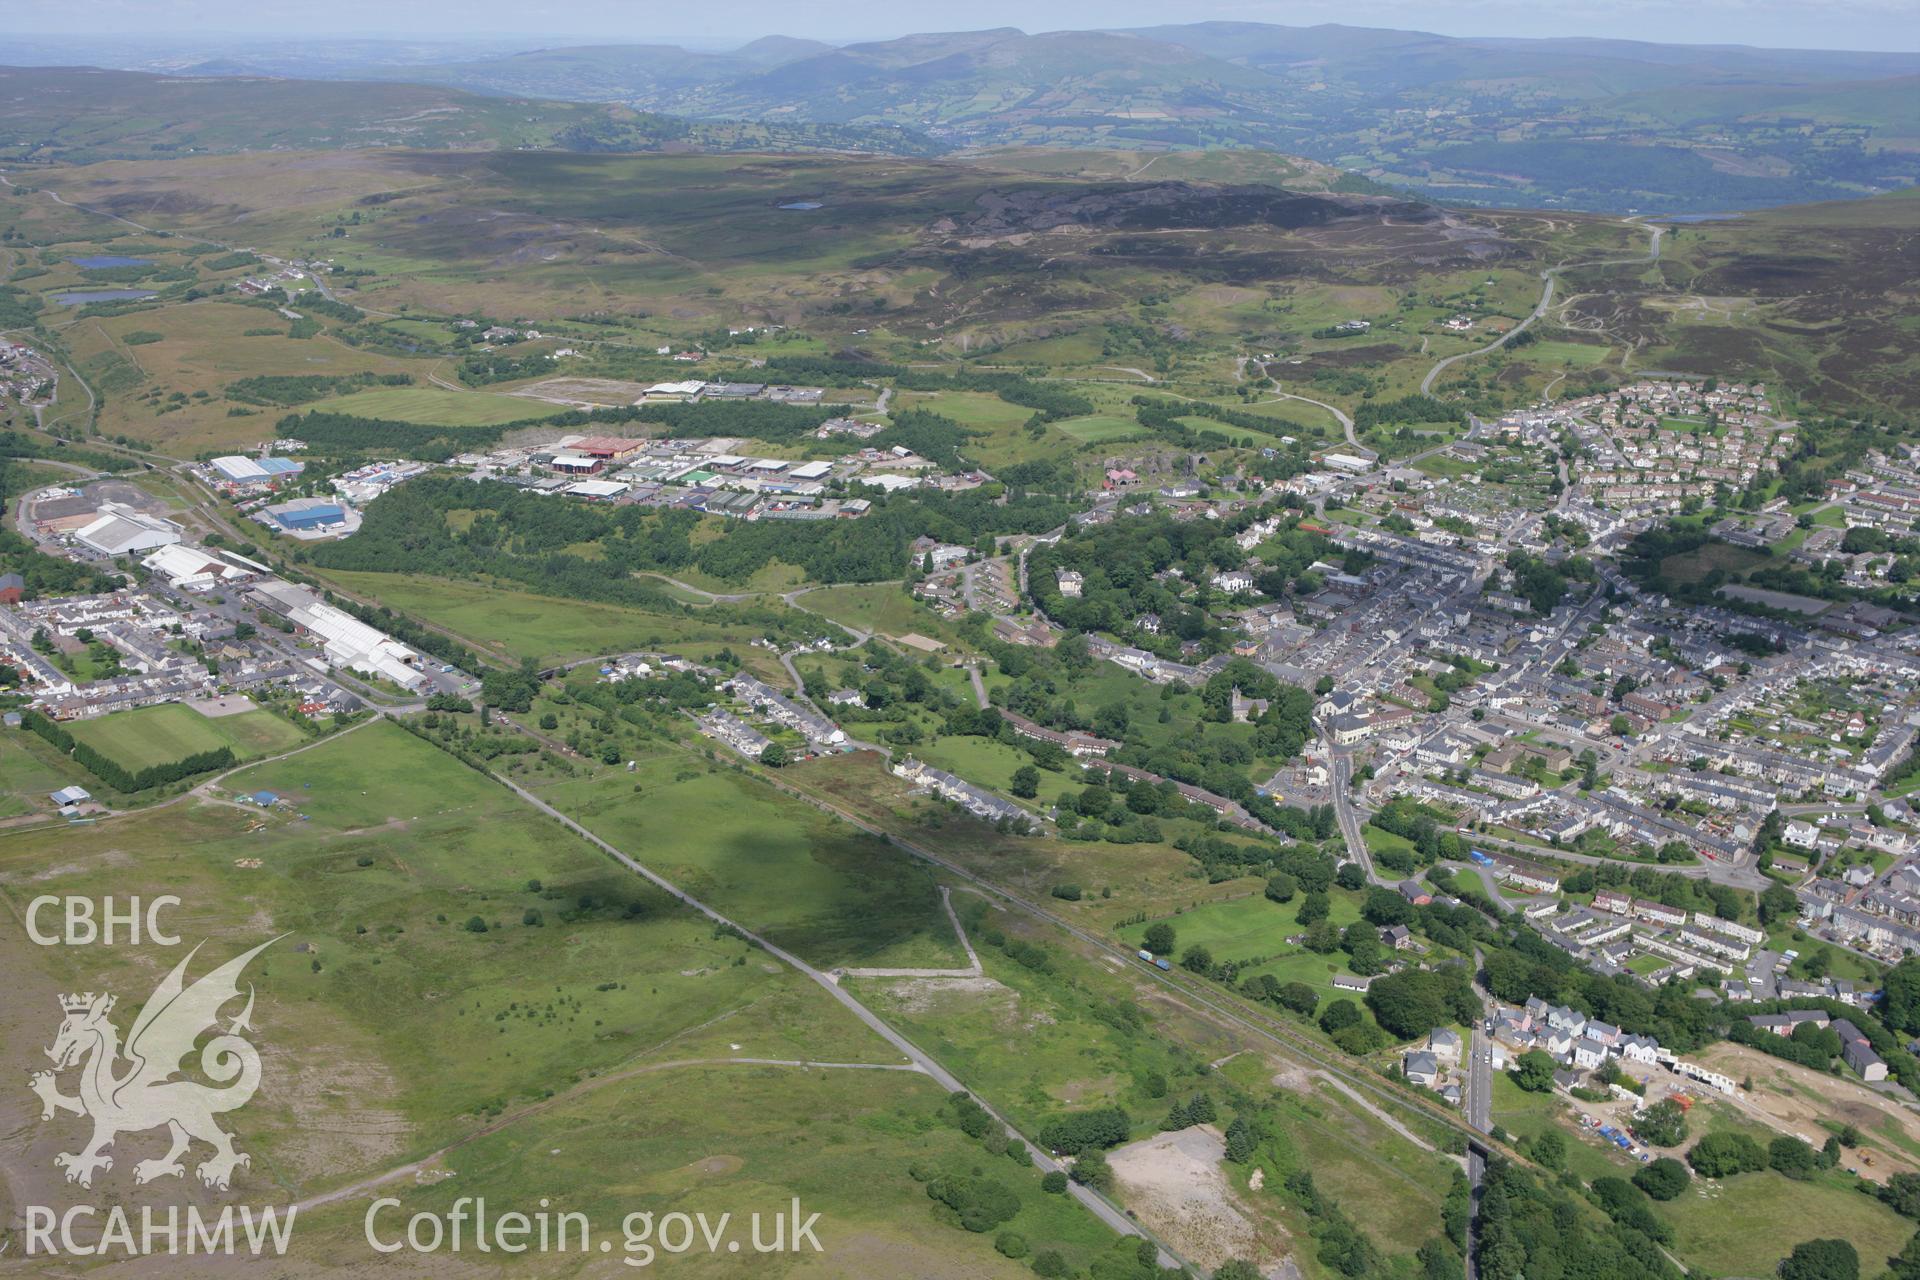 RCAHMW colour oblique photograph of Blaenavon townscape, from the south. Taken by Toby Driver on 21/07/2008.